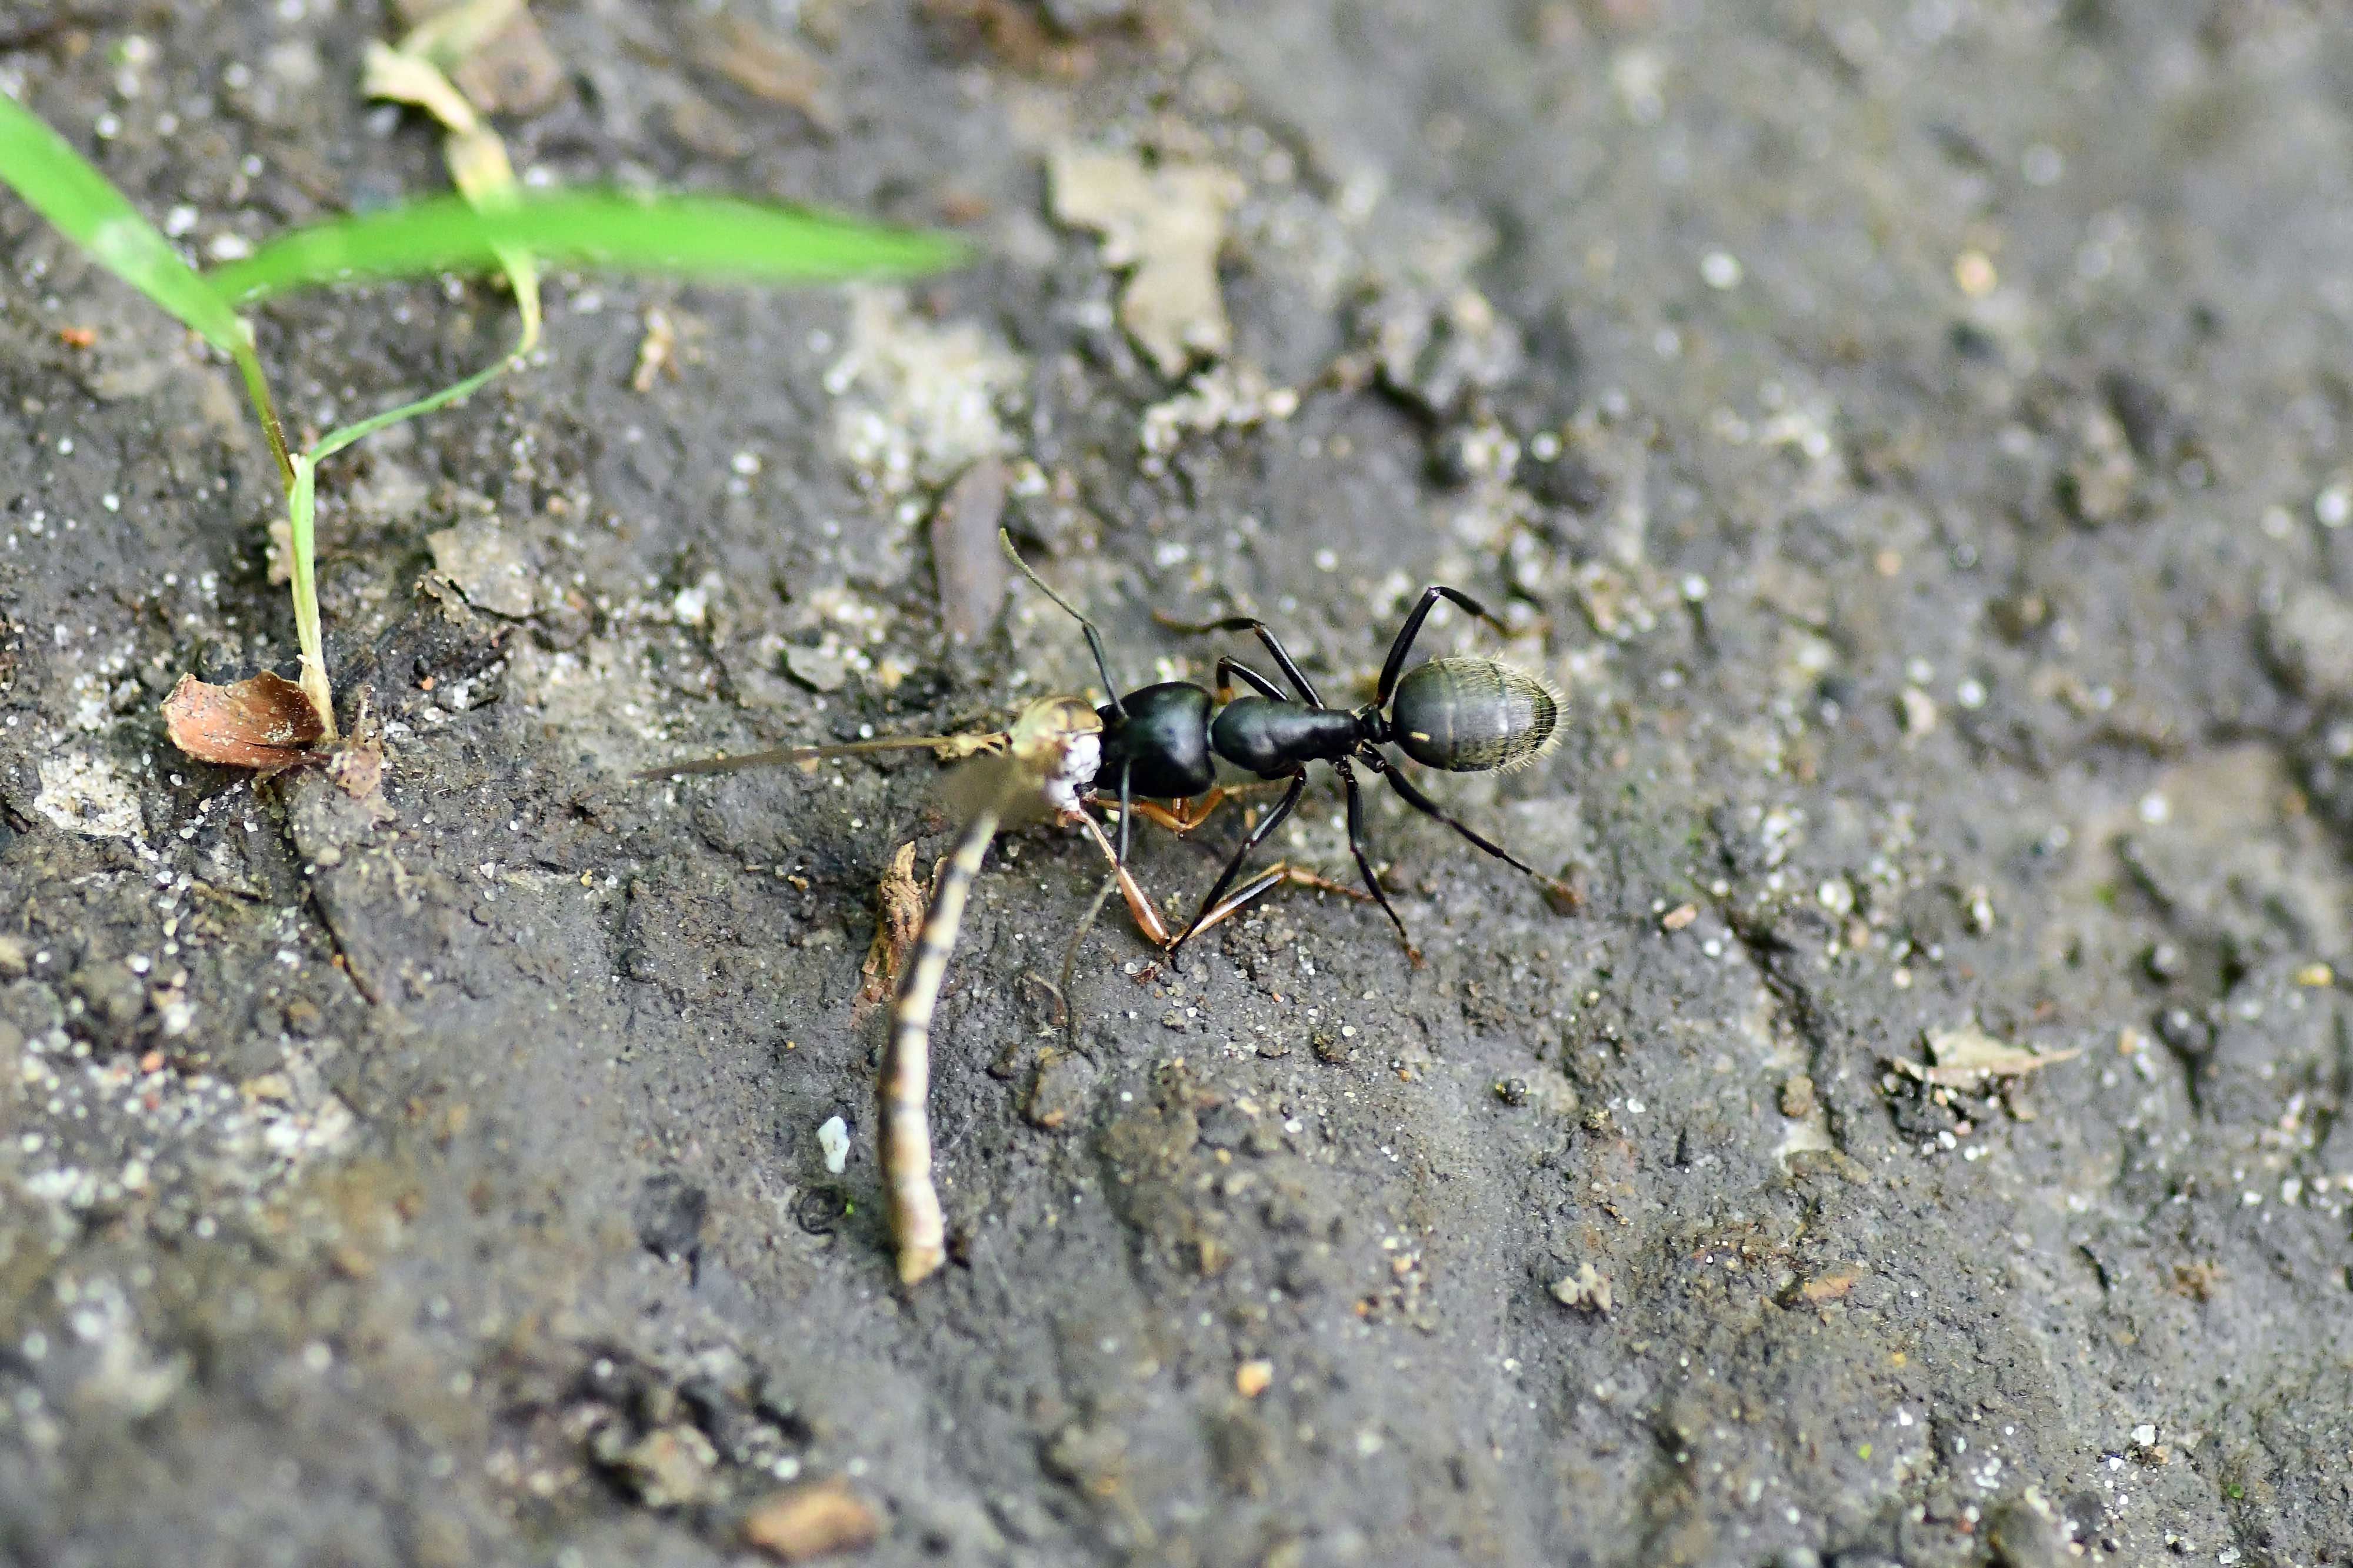 An ant carrying a damselfly.